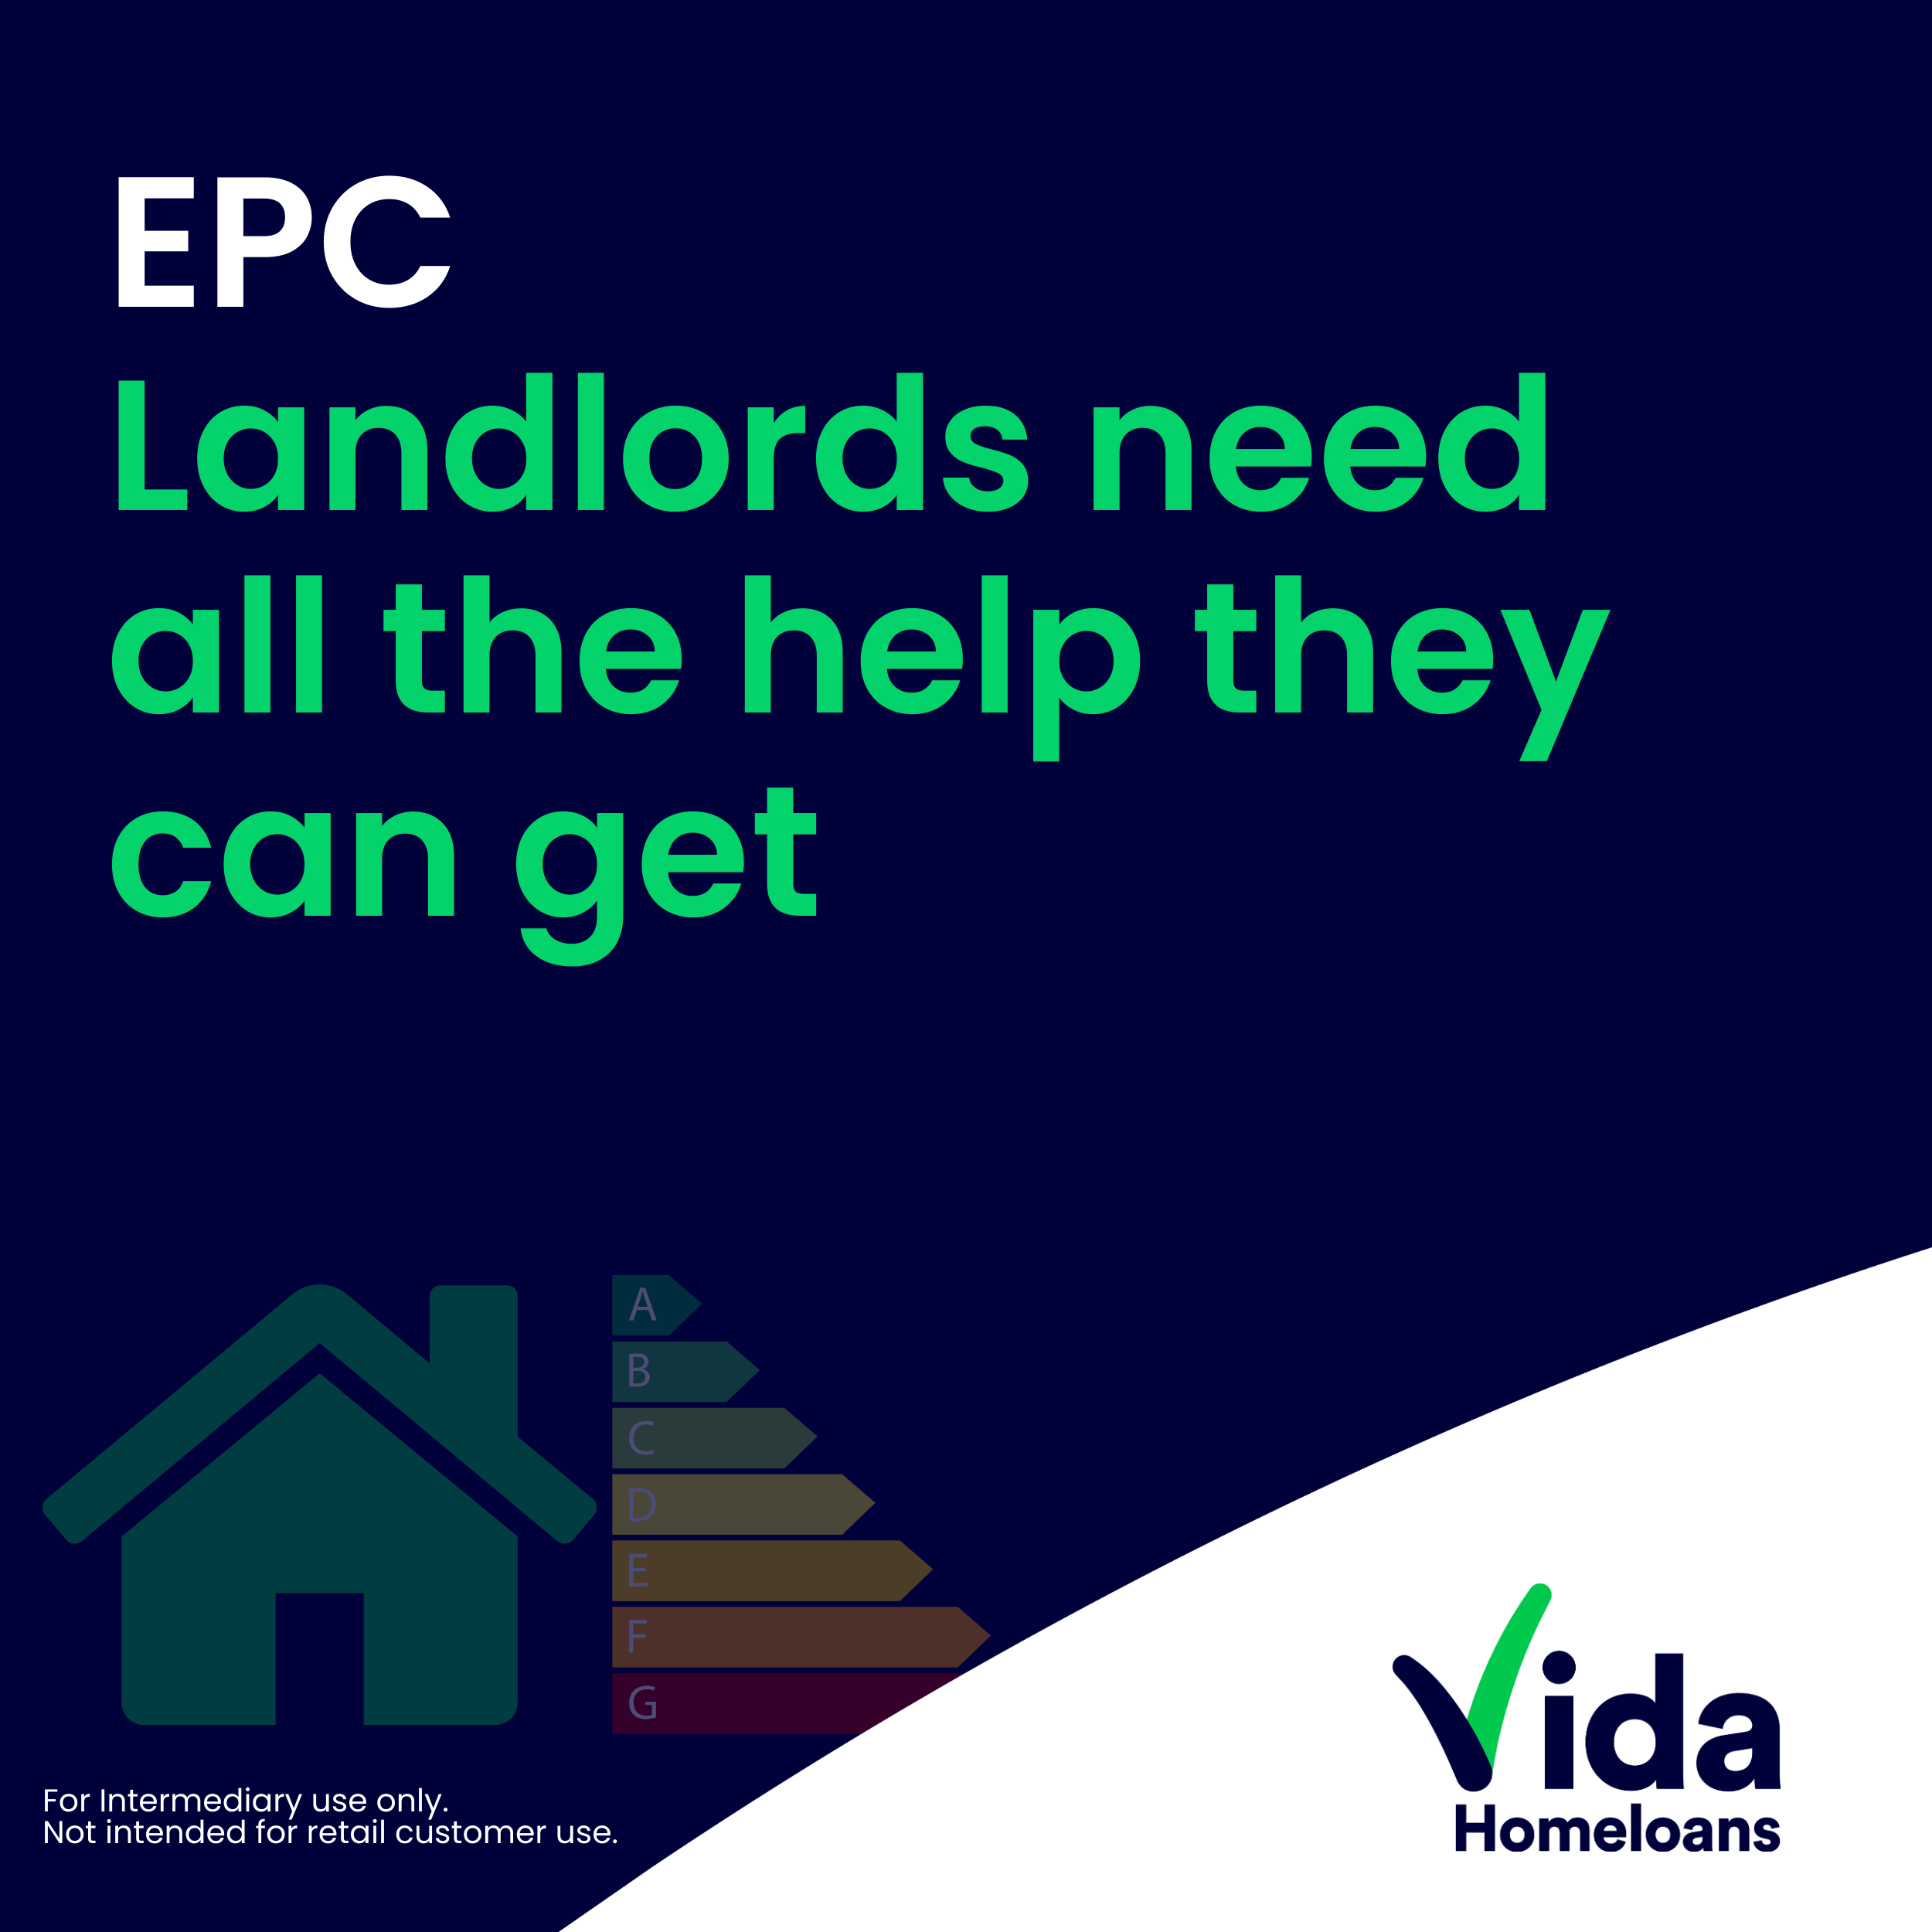 EPC Landlords need all the help they can get